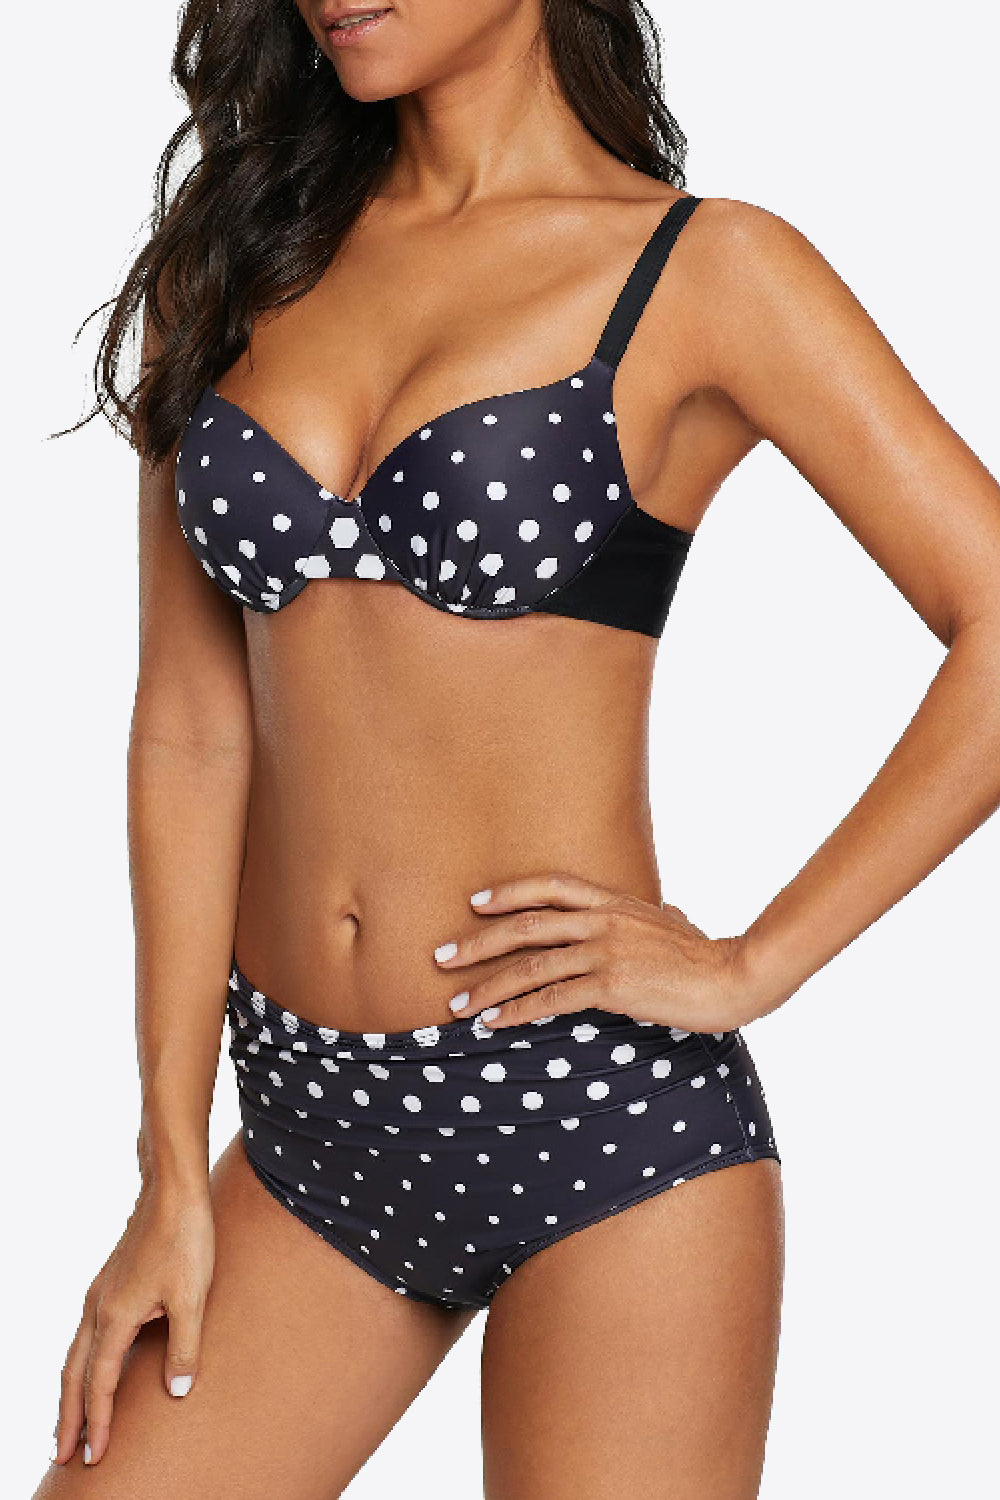 Summer Lovin' Polka Dot Bikini Set - Embrace your natural elegance and romance the waves with unparalleled beauty and comfort. - Guy Christopher 